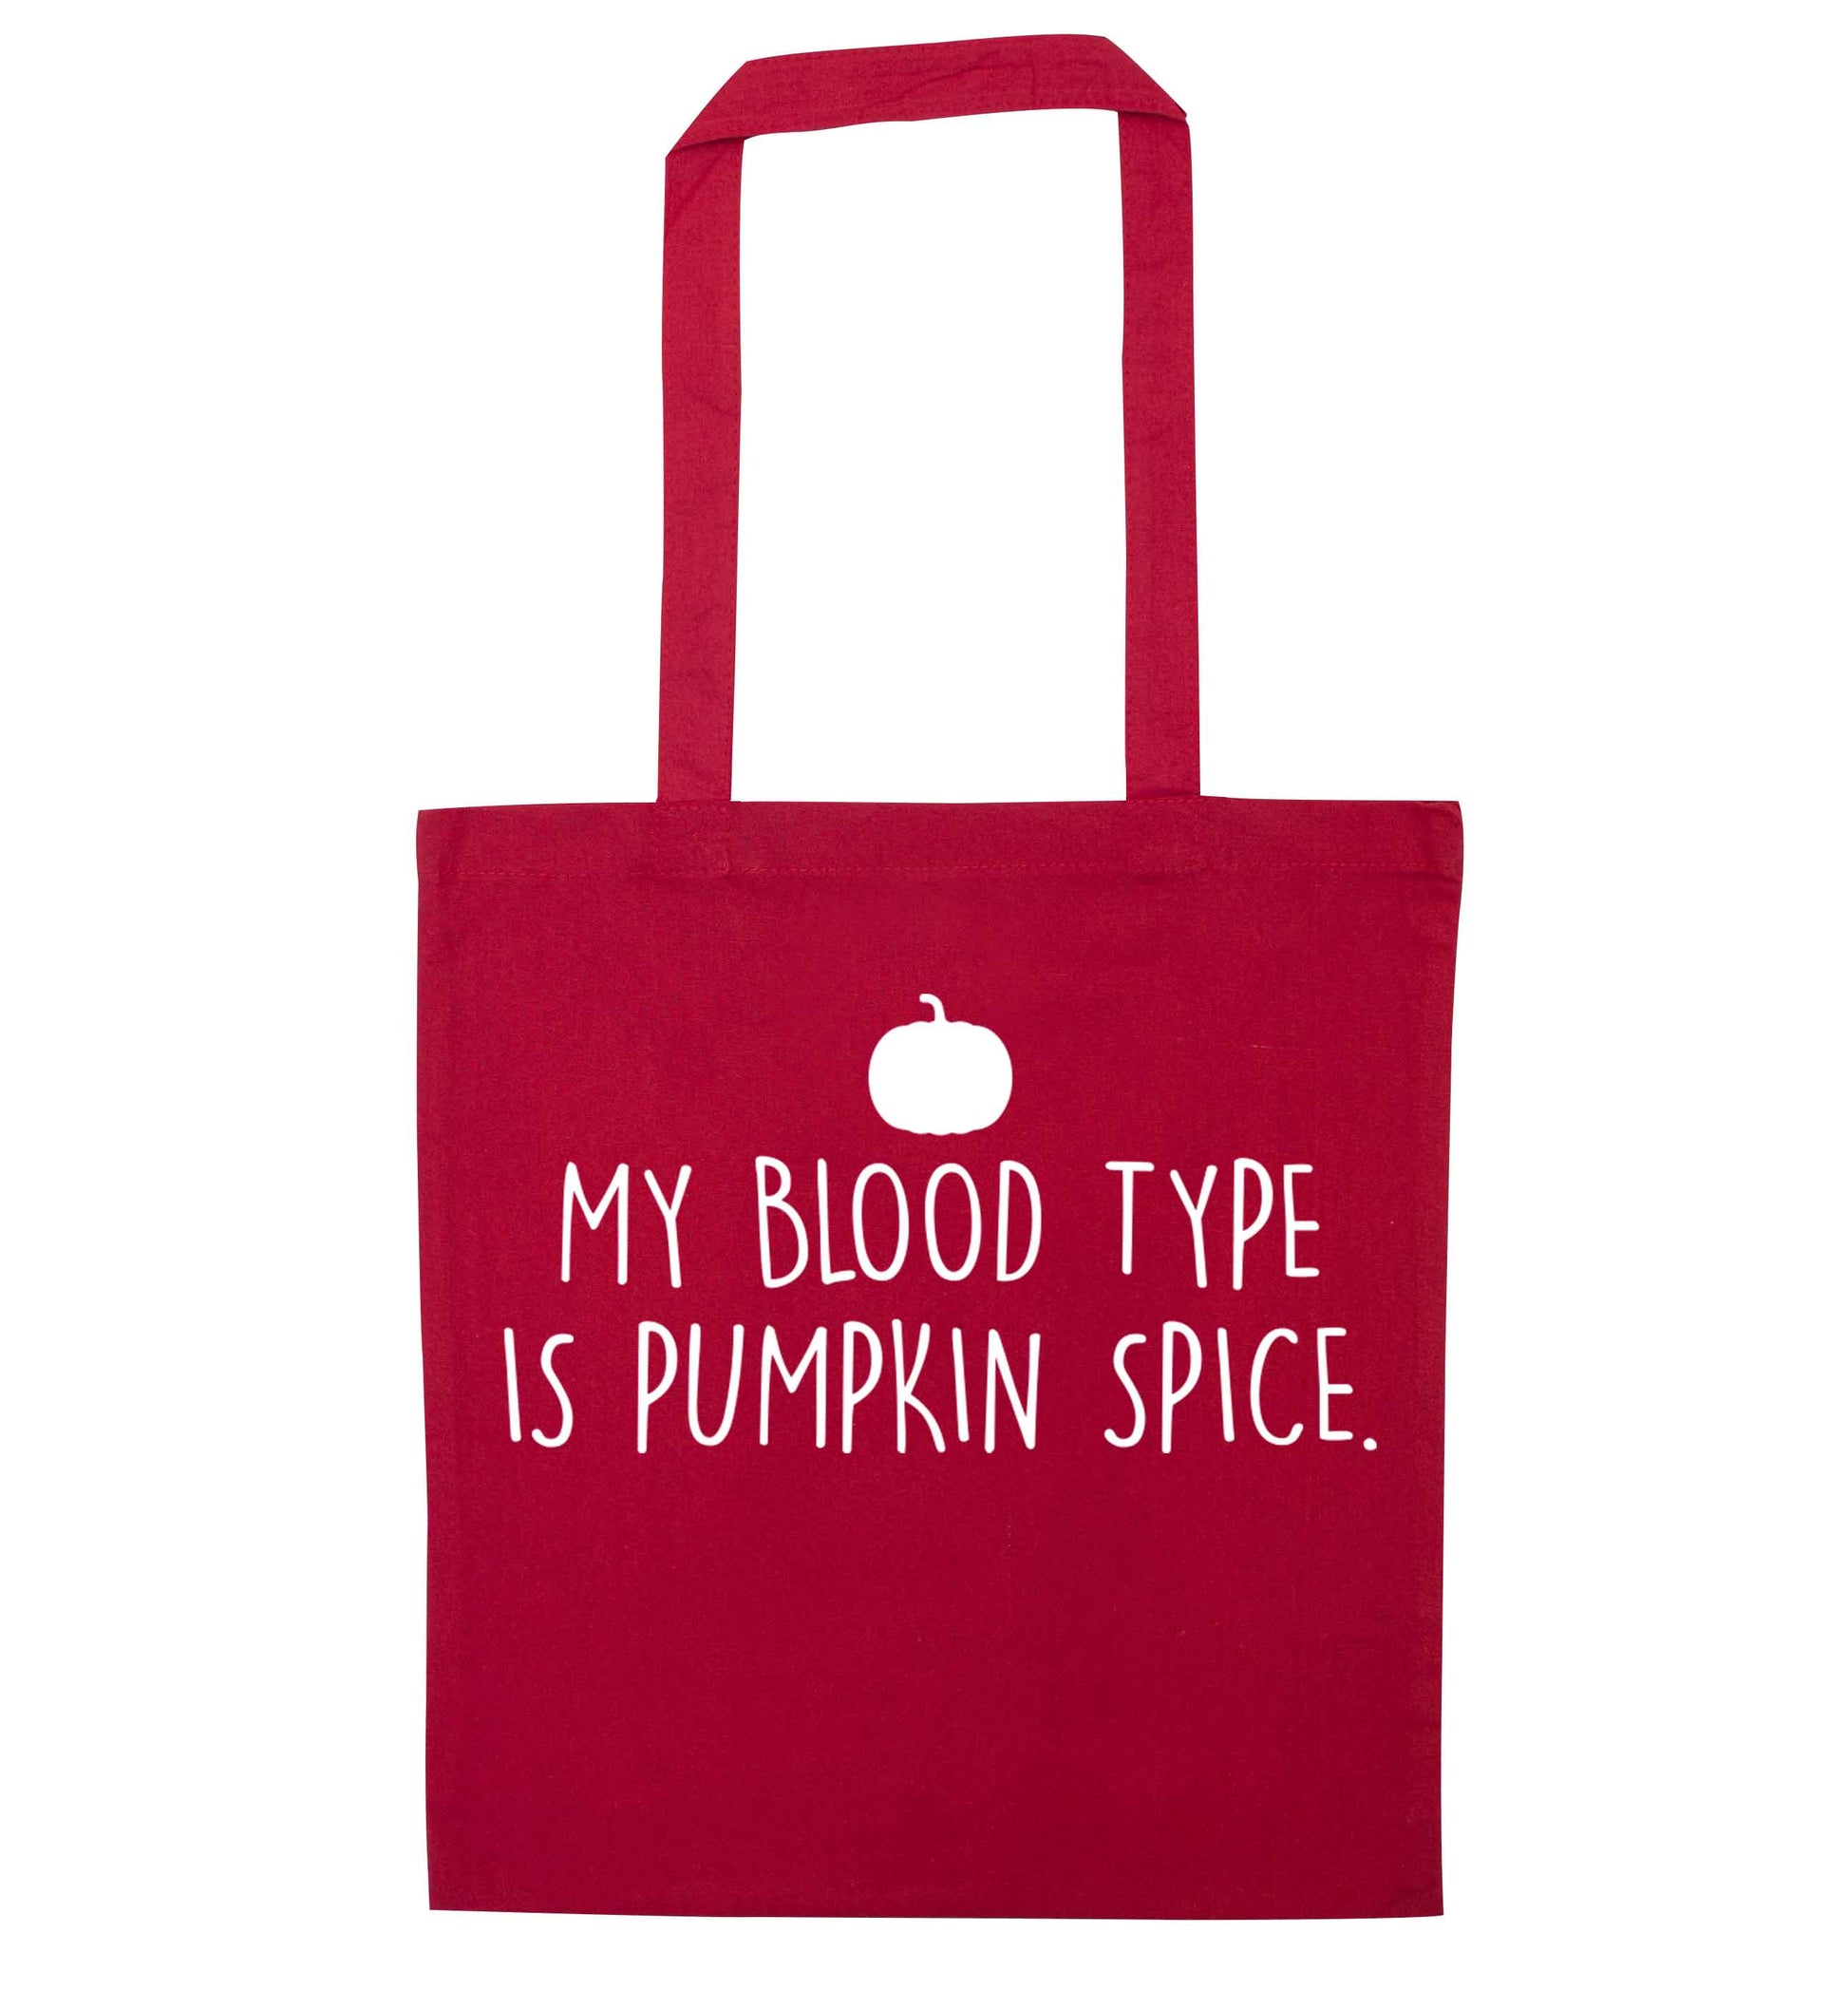 Let Be Pumpkin Spice red tote bag